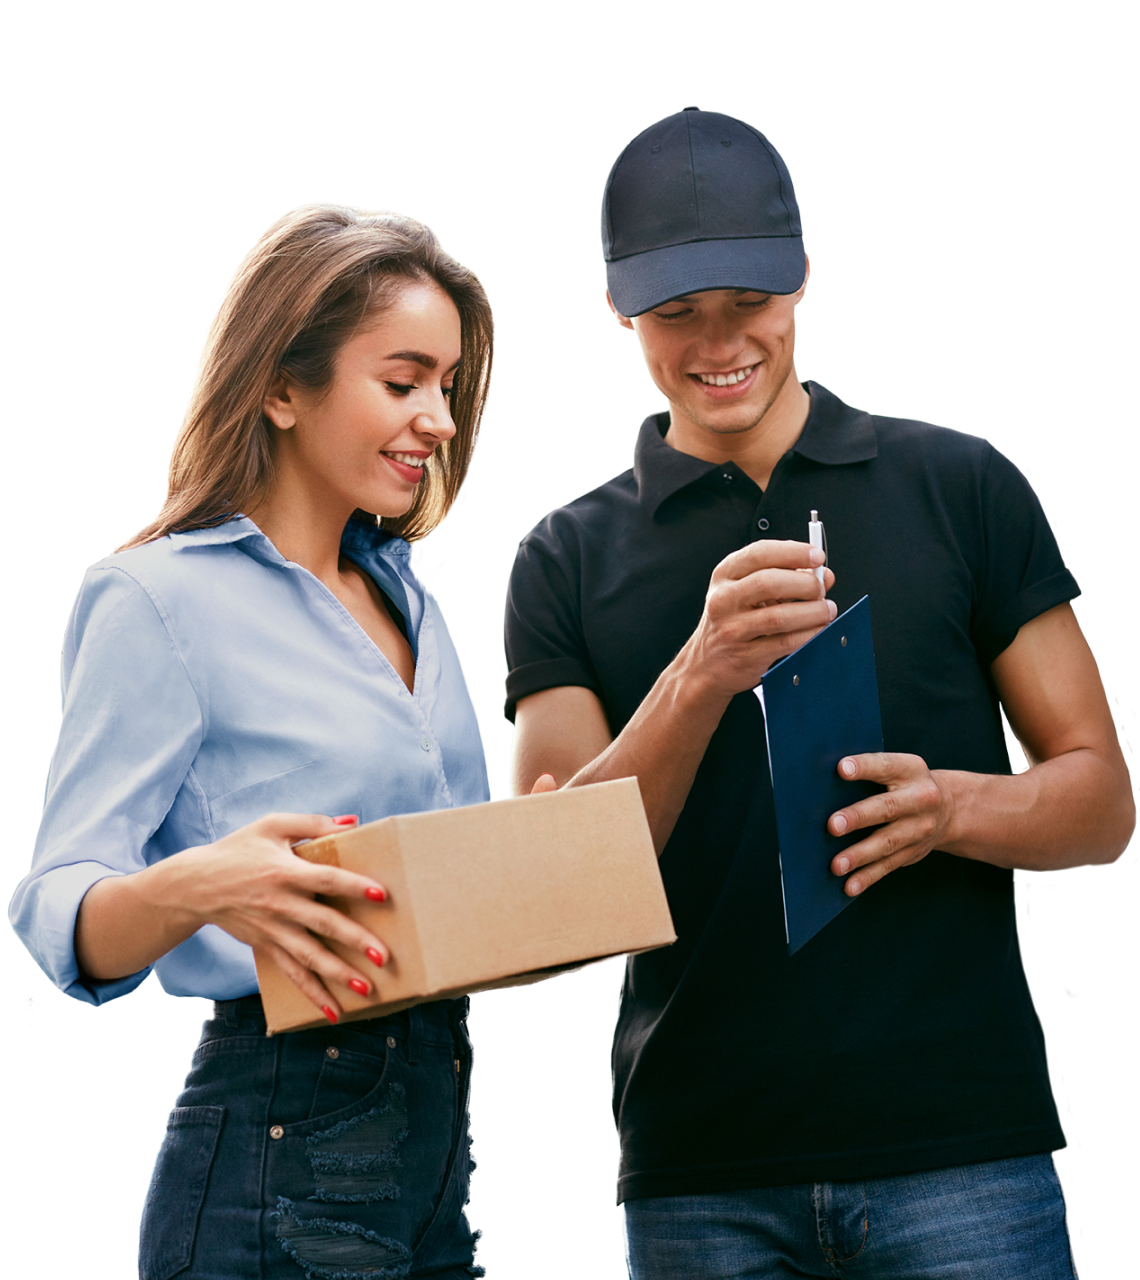 One Day Courier Service in India - experienced courier - borzo delivery